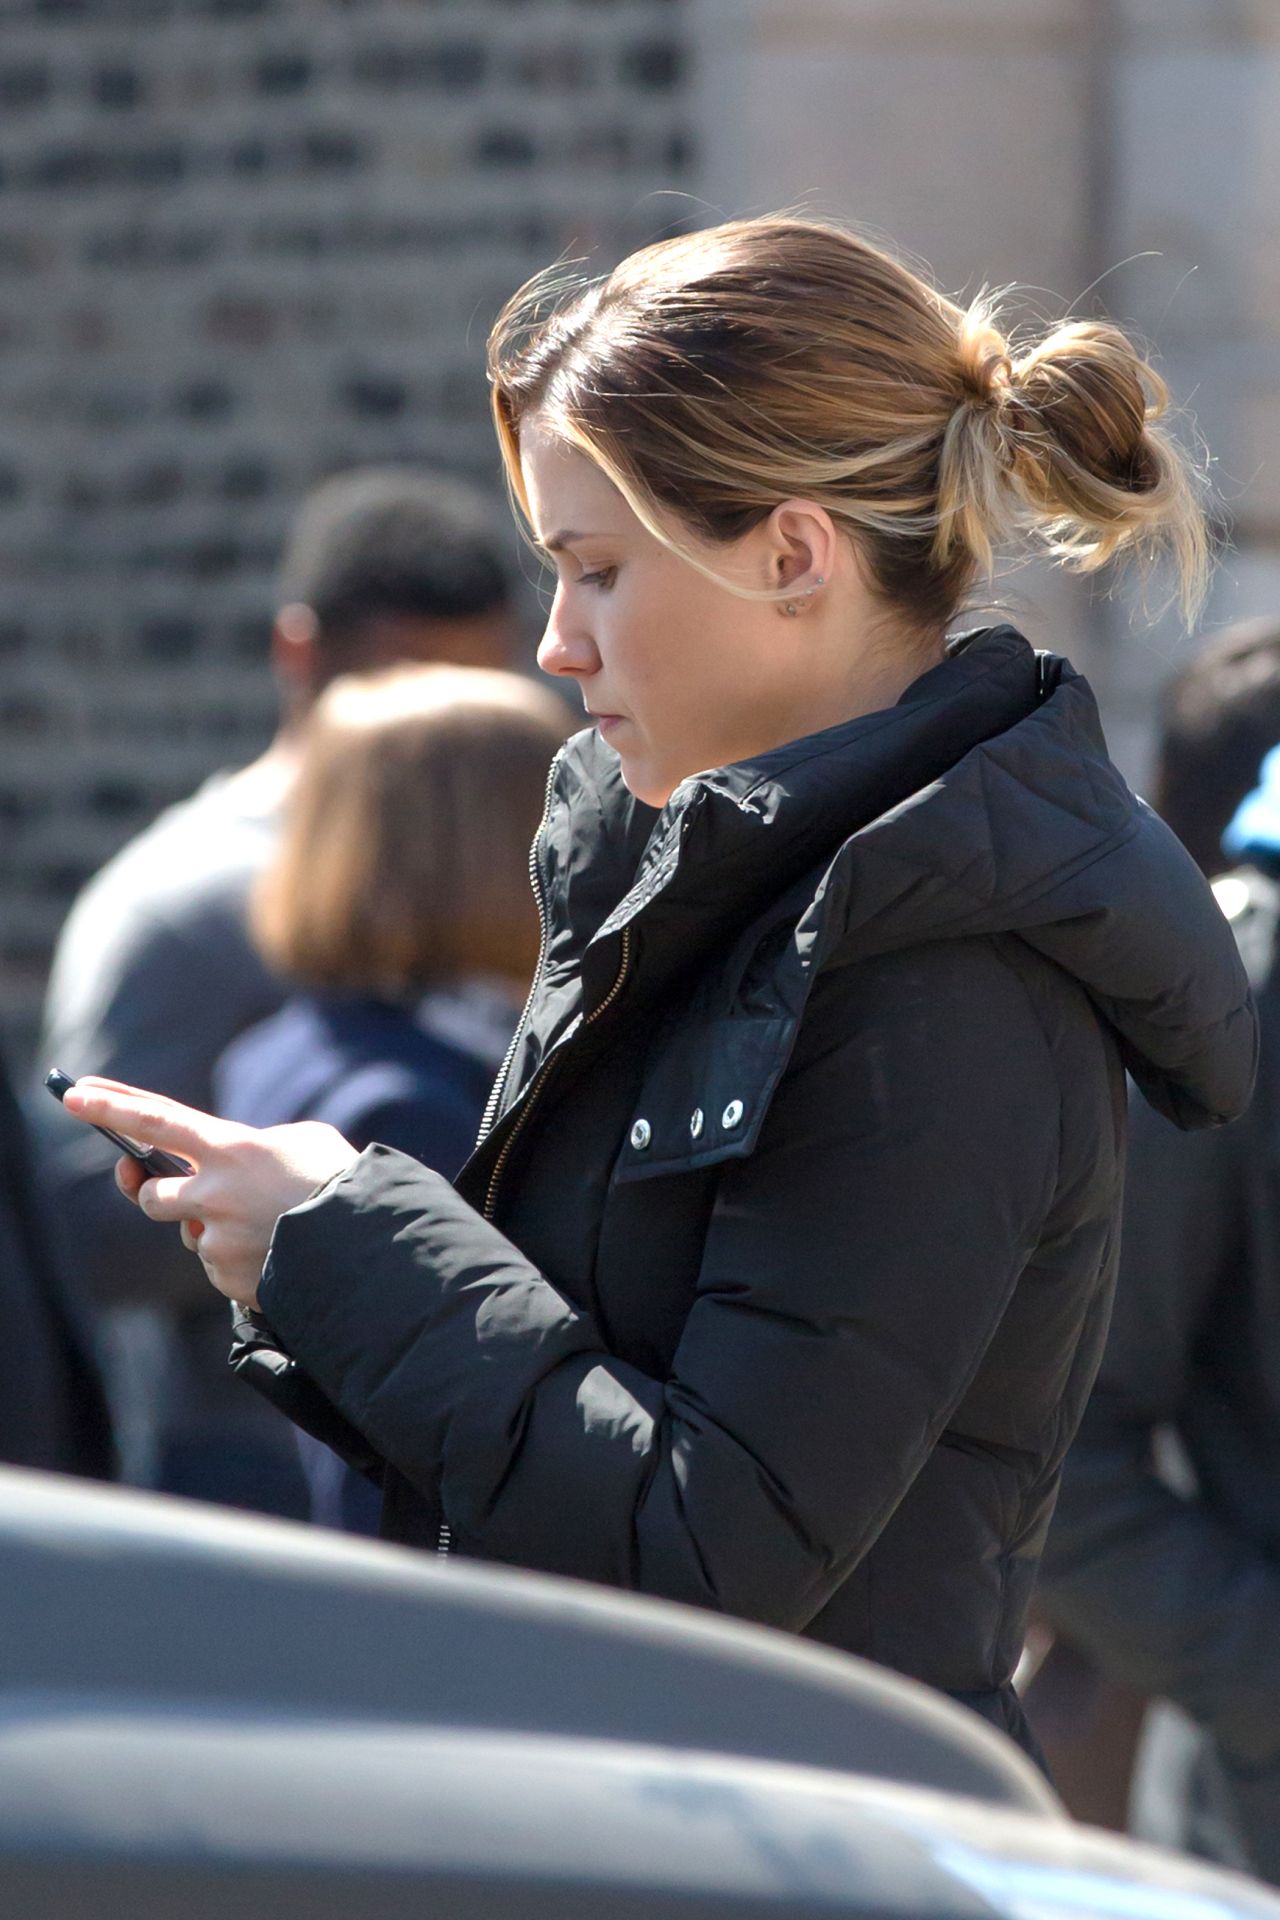 Sophia Bush On the Set of 'Chicago PD' in Chicago, April 2015